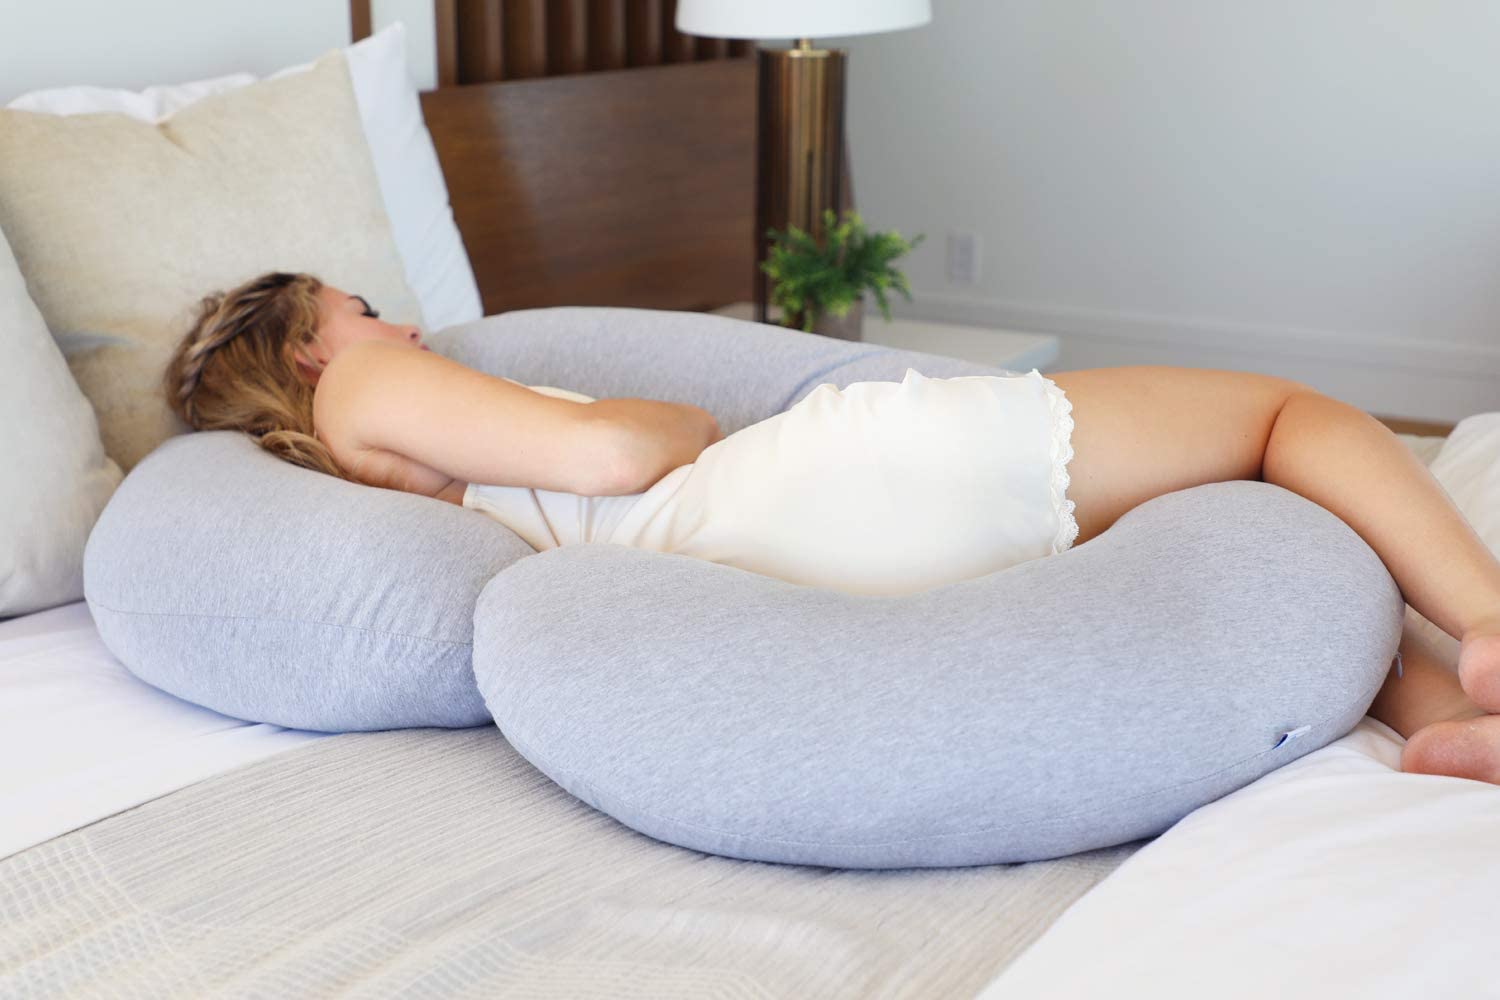 PharMeDoc Pregnancy Pillow - C-Shaped Body Pillow for Pregnant Women - Jersey Cover, Gray - image 7 of 8